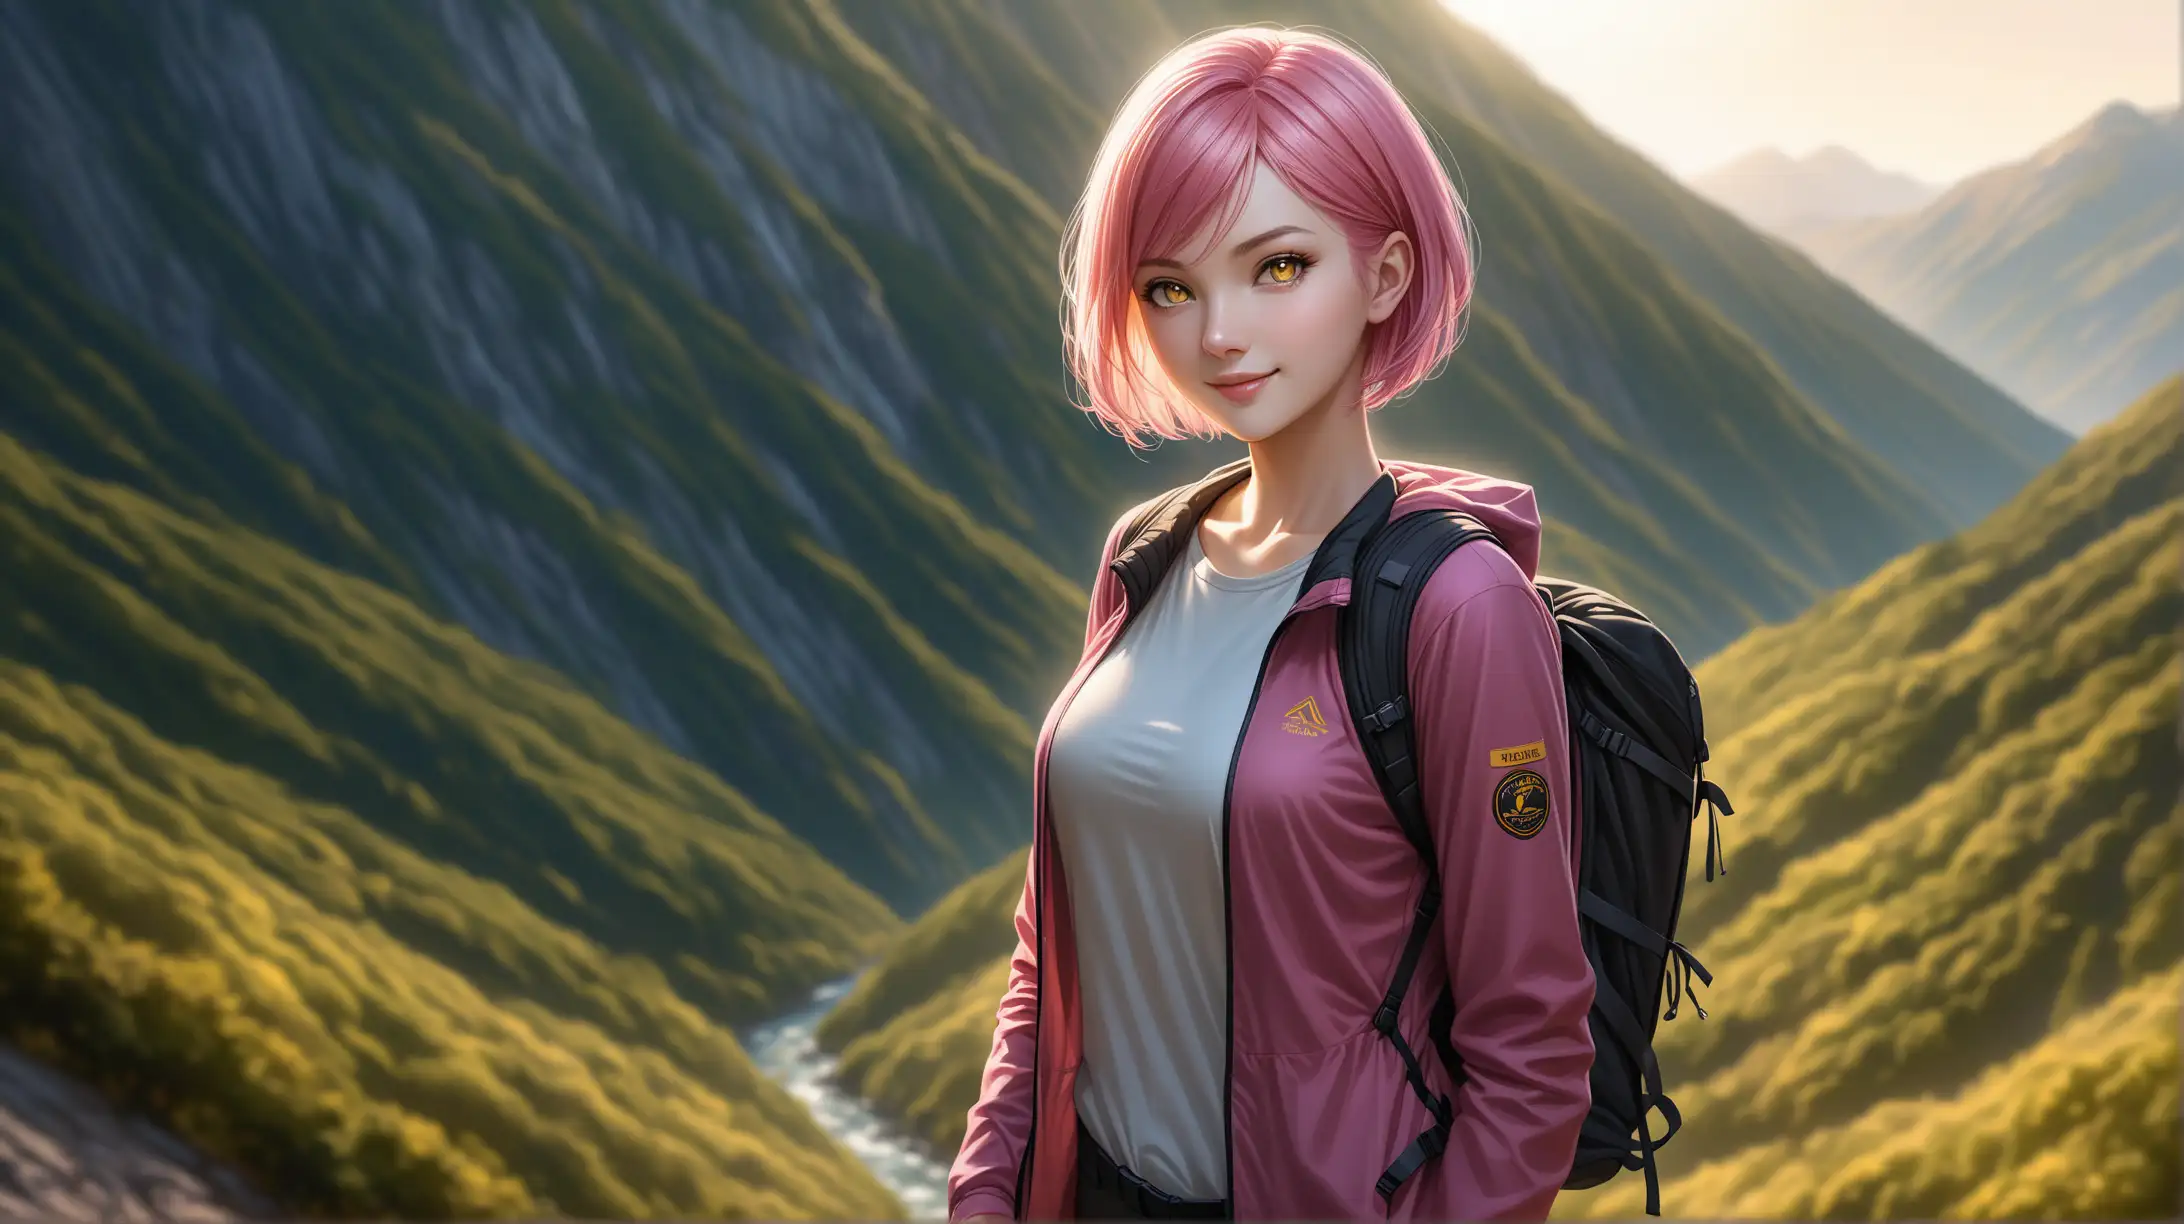 Draw a woman, short pink hair, yellow ringed eyes, slender figure, high quality, realistic, accurate, detailed, long shot, outdoors, dim lighting, hiking outfit, seductive pose, smiling toward viewer